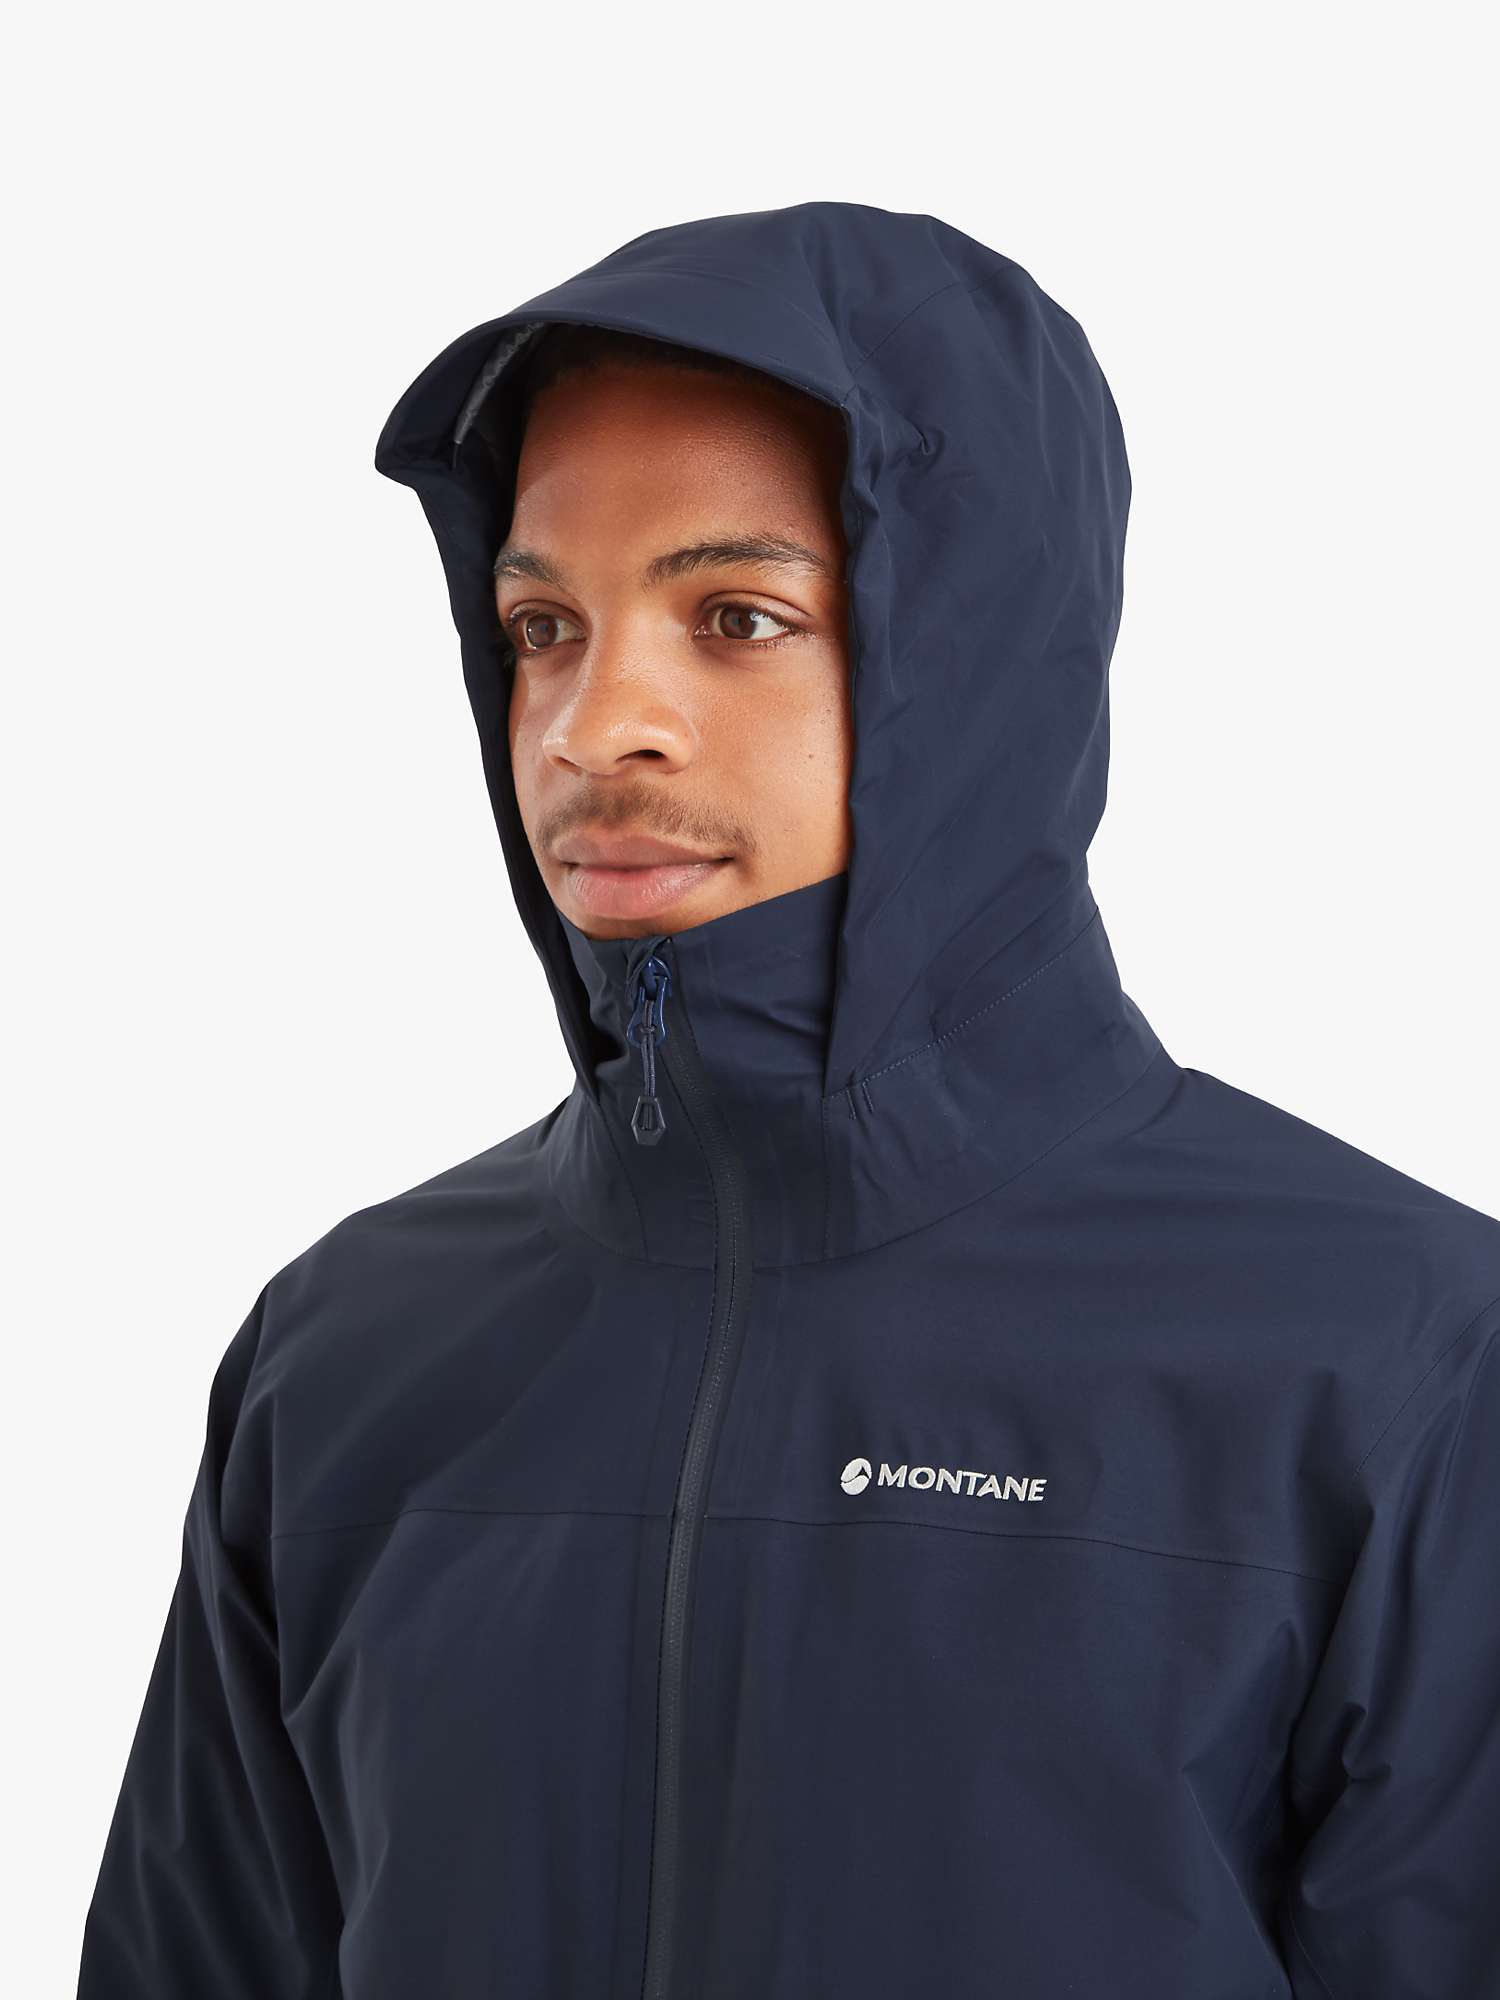 Buy Montane Phase Pro Shell Waterproof Jacket, Eclipse Blue Online at johnlewis.com